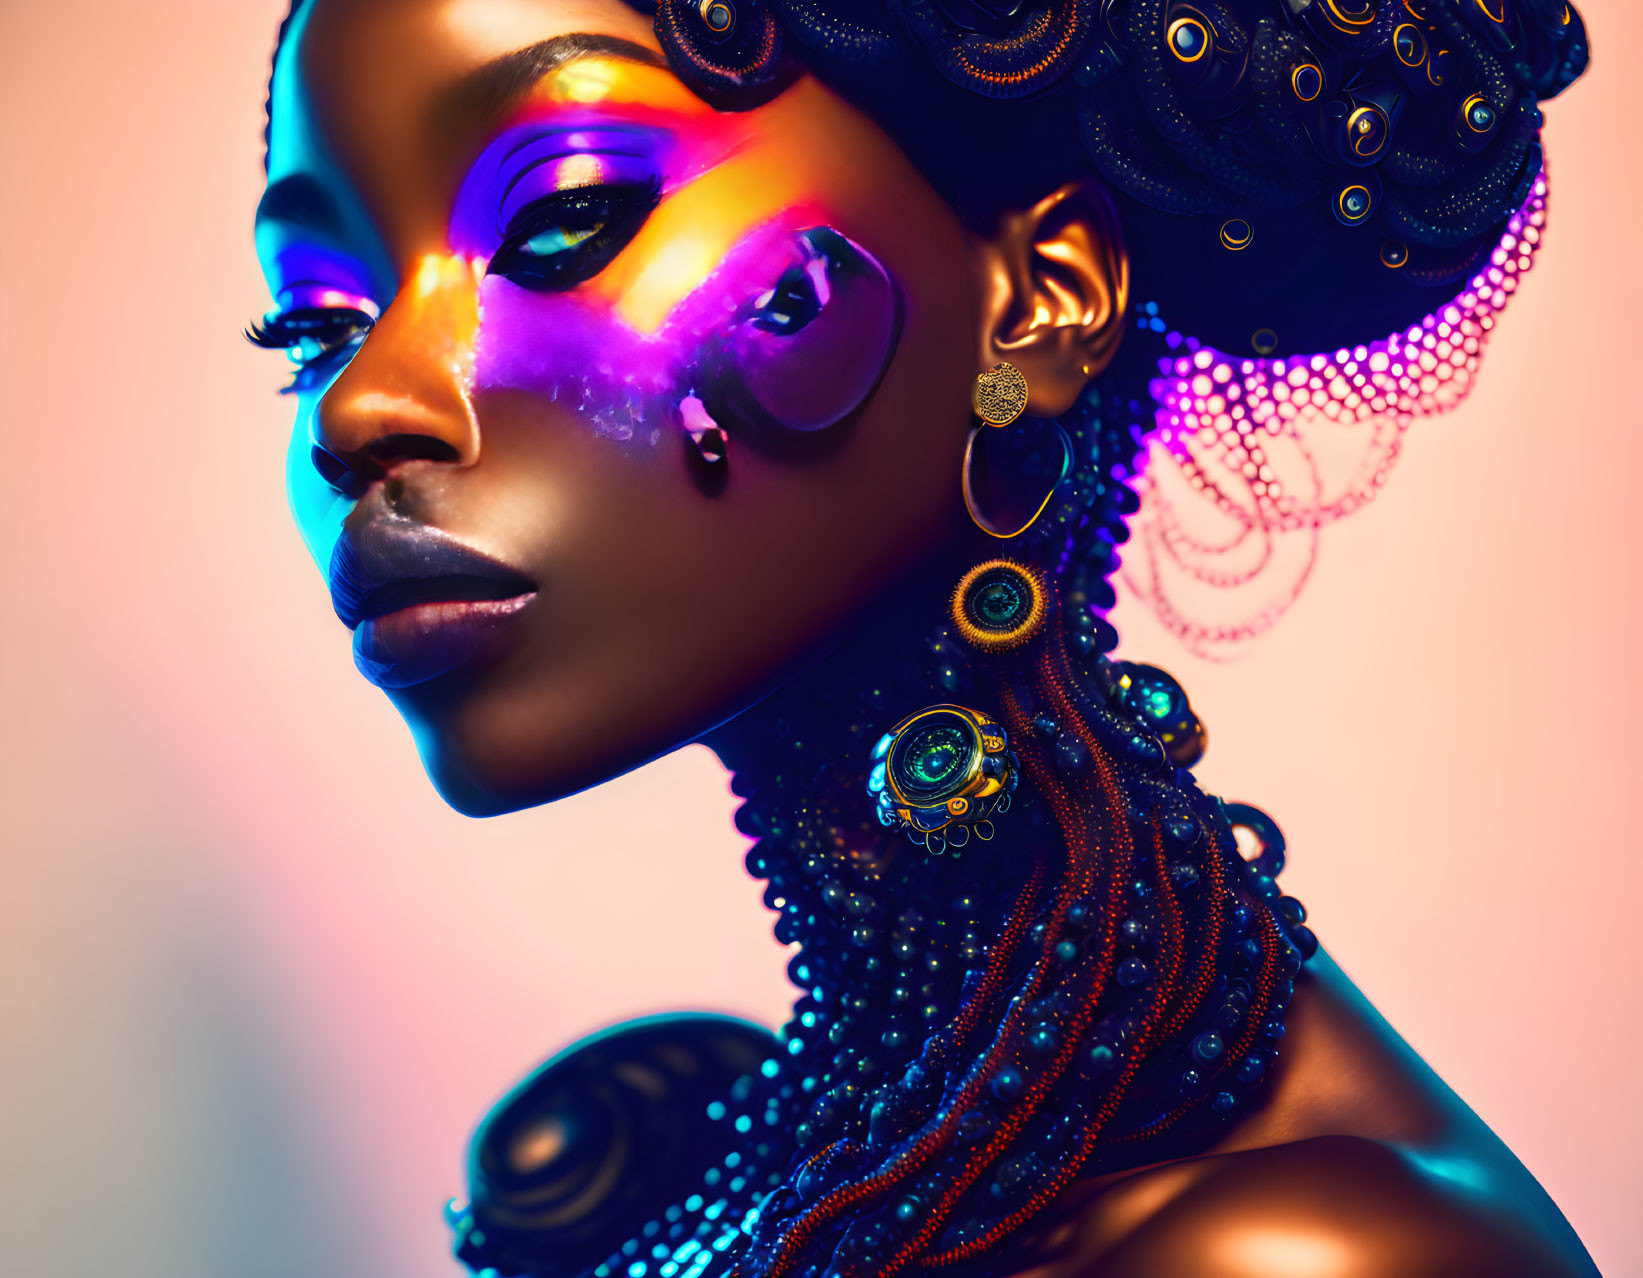 Vibrant, colorful makeup on woman in futuristic style